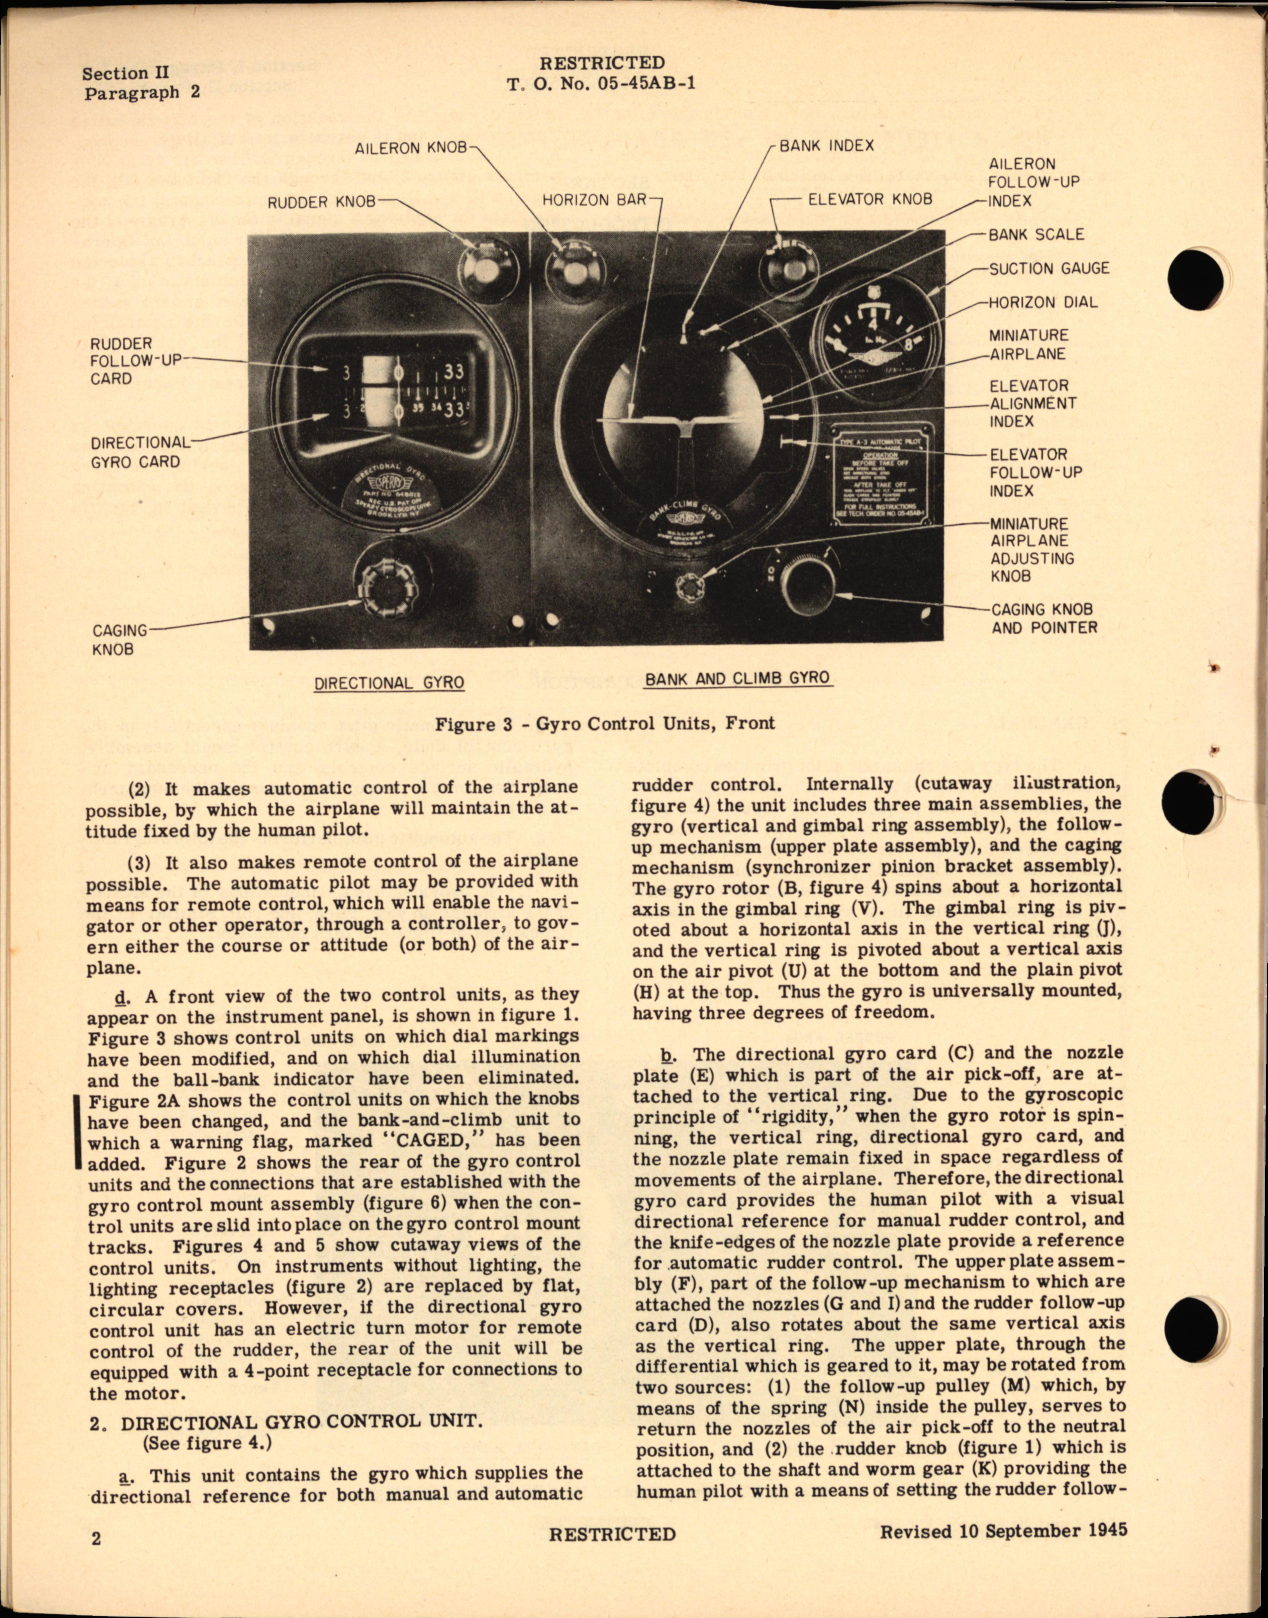 Sample page 6 from AirCorps Library document: Operation and Service Instructions for Automatic Pilot Type A-3